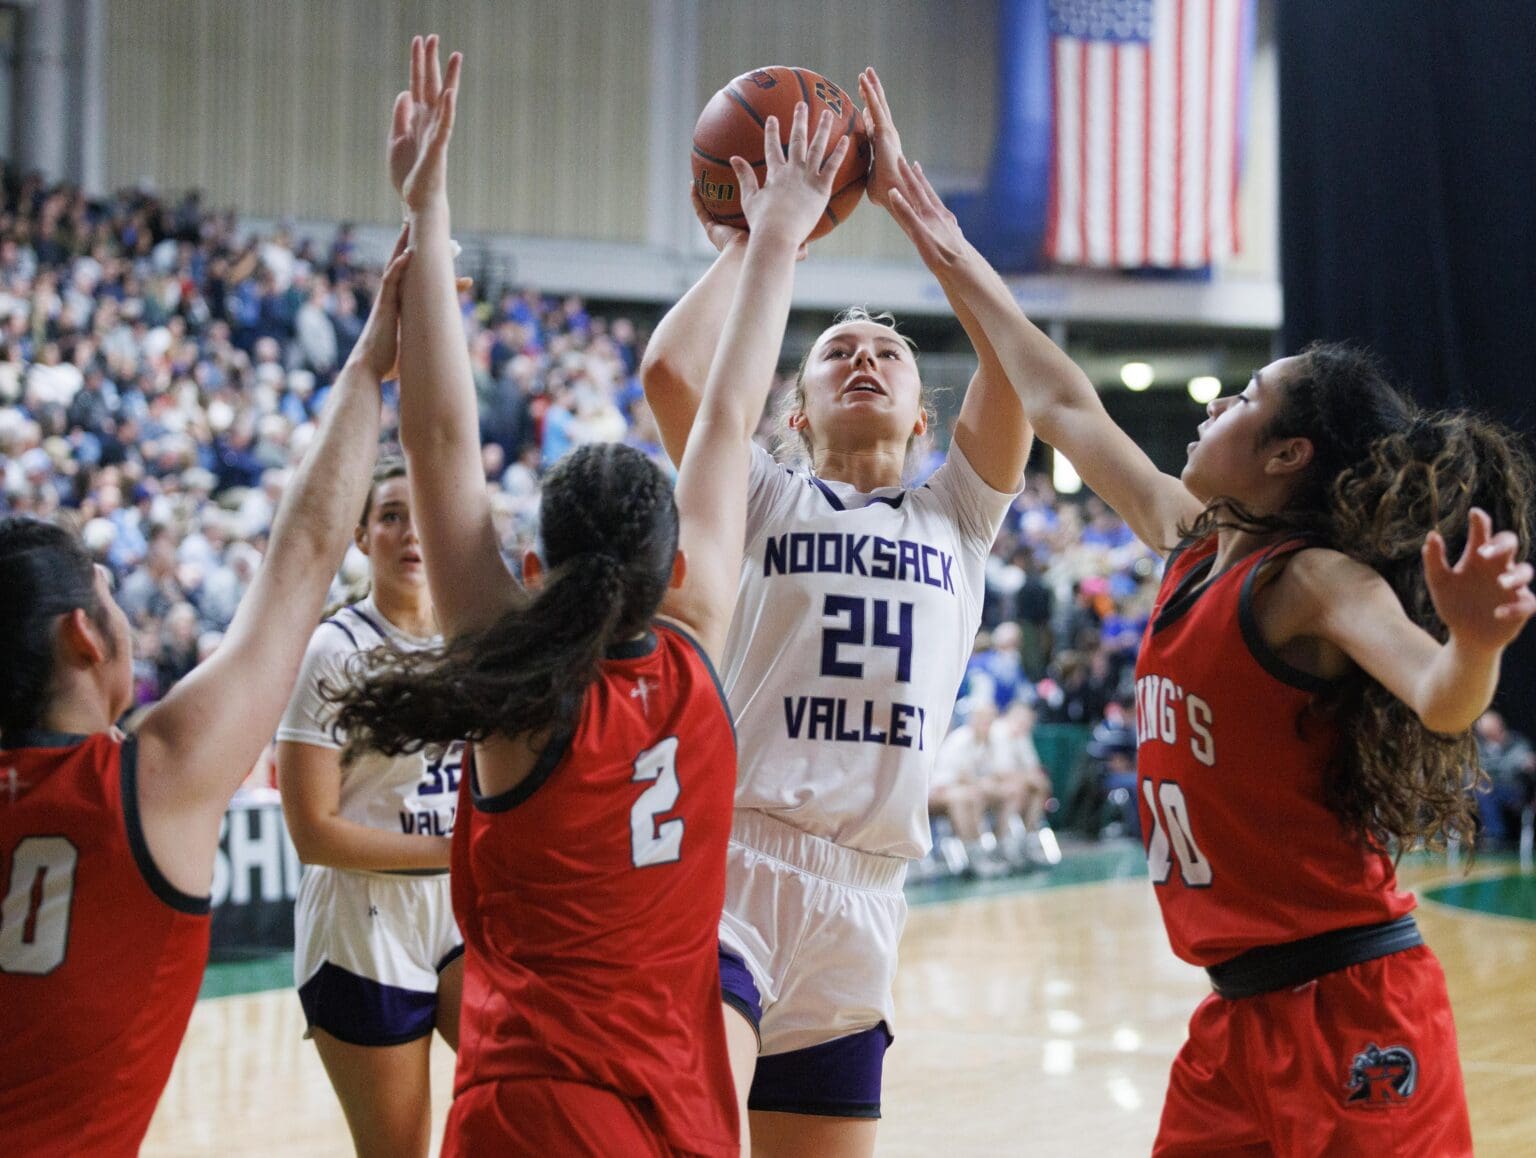 Three King's defenders try to stop a shot by Nooksack Valley's Devin Coppinger as they reach over her with their arms extended.